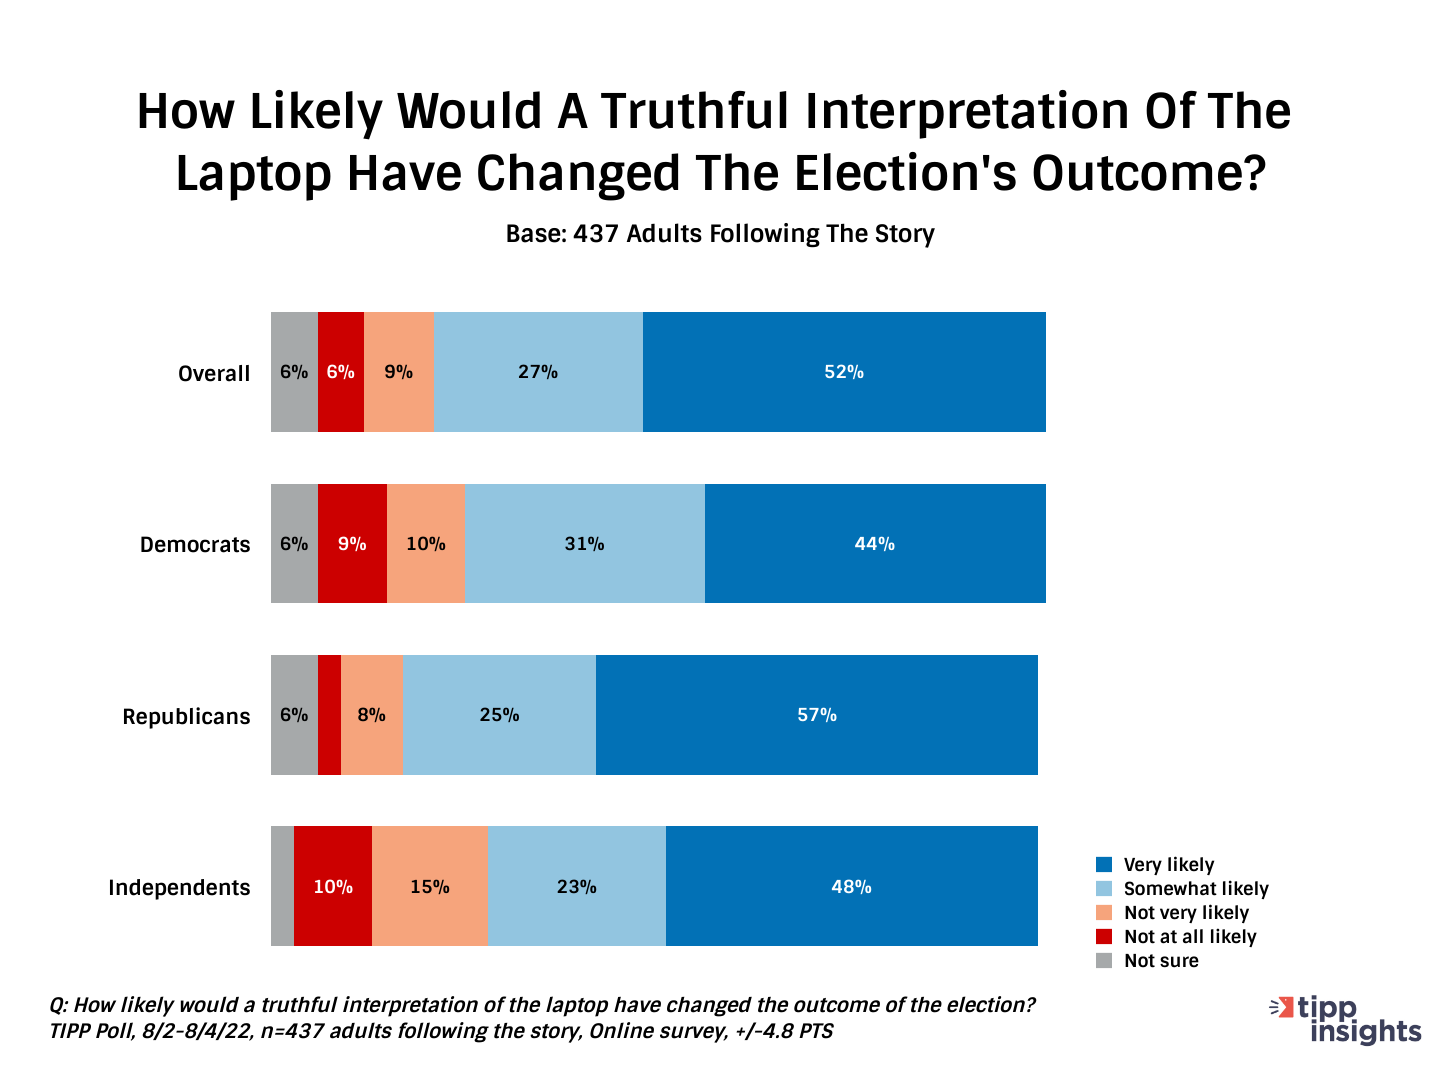 TIPP Poll results: How likely would a truthful interpretation of the hunter biden laptop have change elections outcome